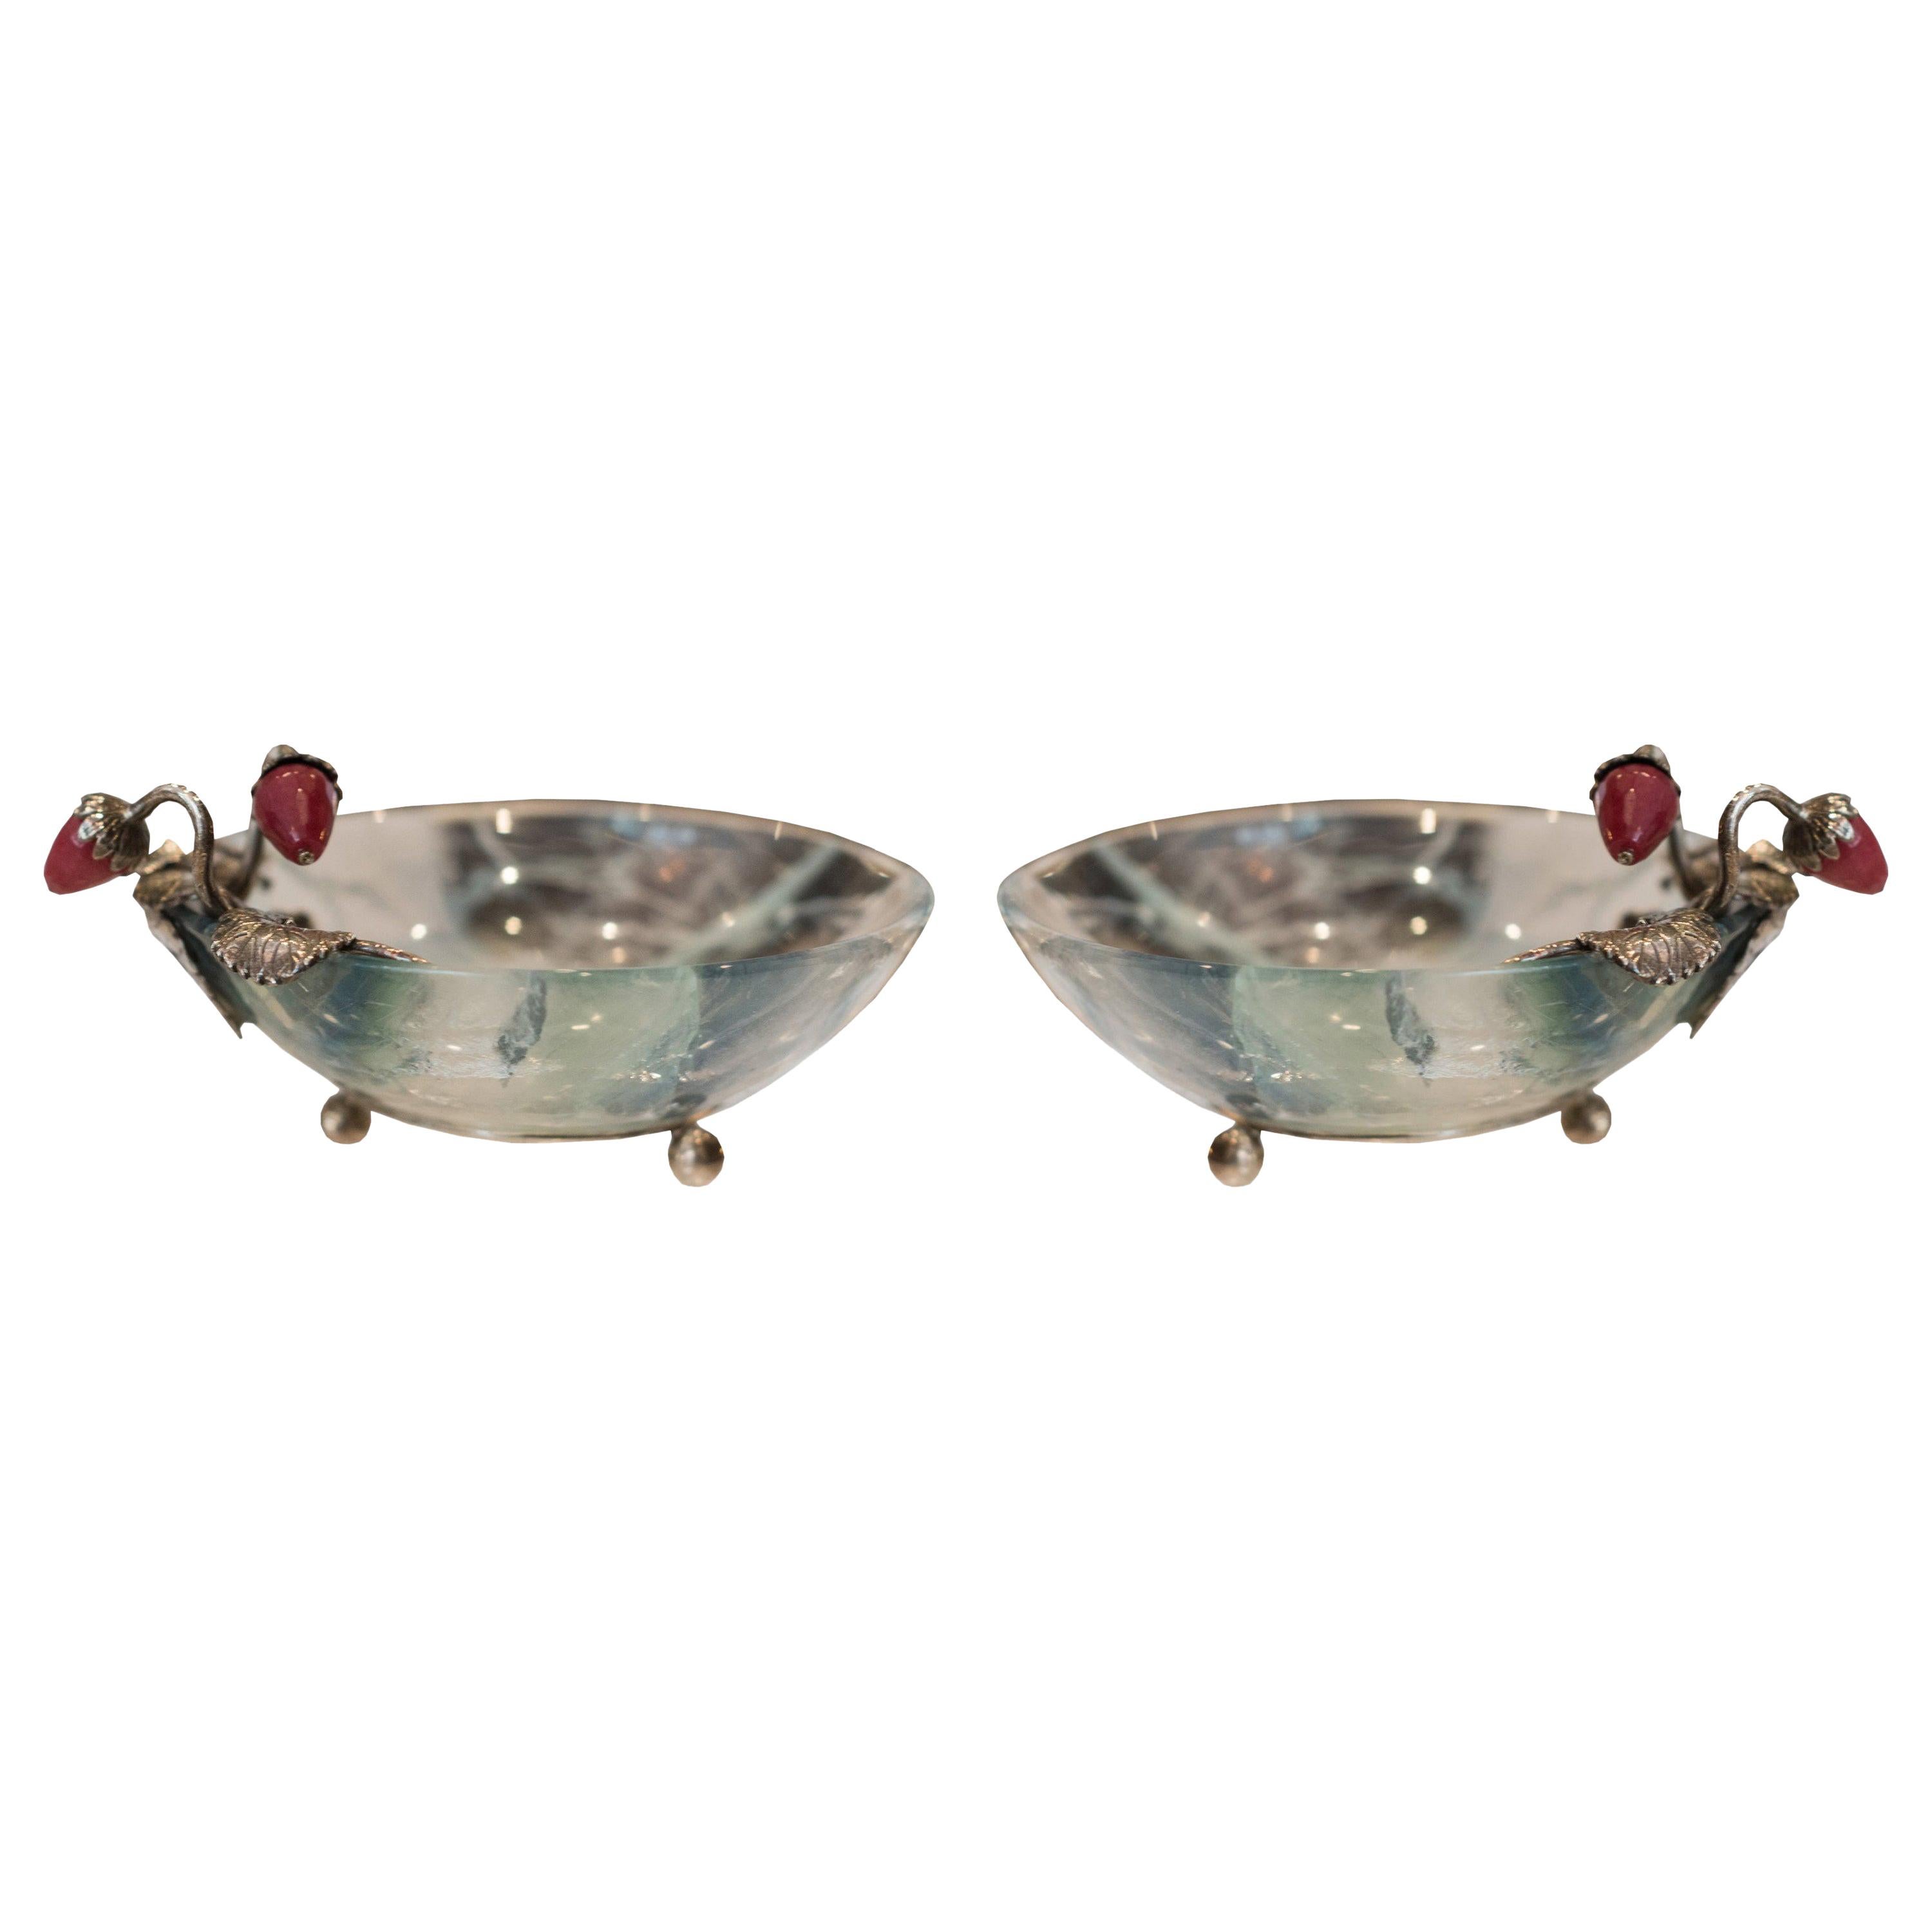 Contemporary Pair of Pestelli Fluorite Bowls with Silver Leaves & Stone Berries